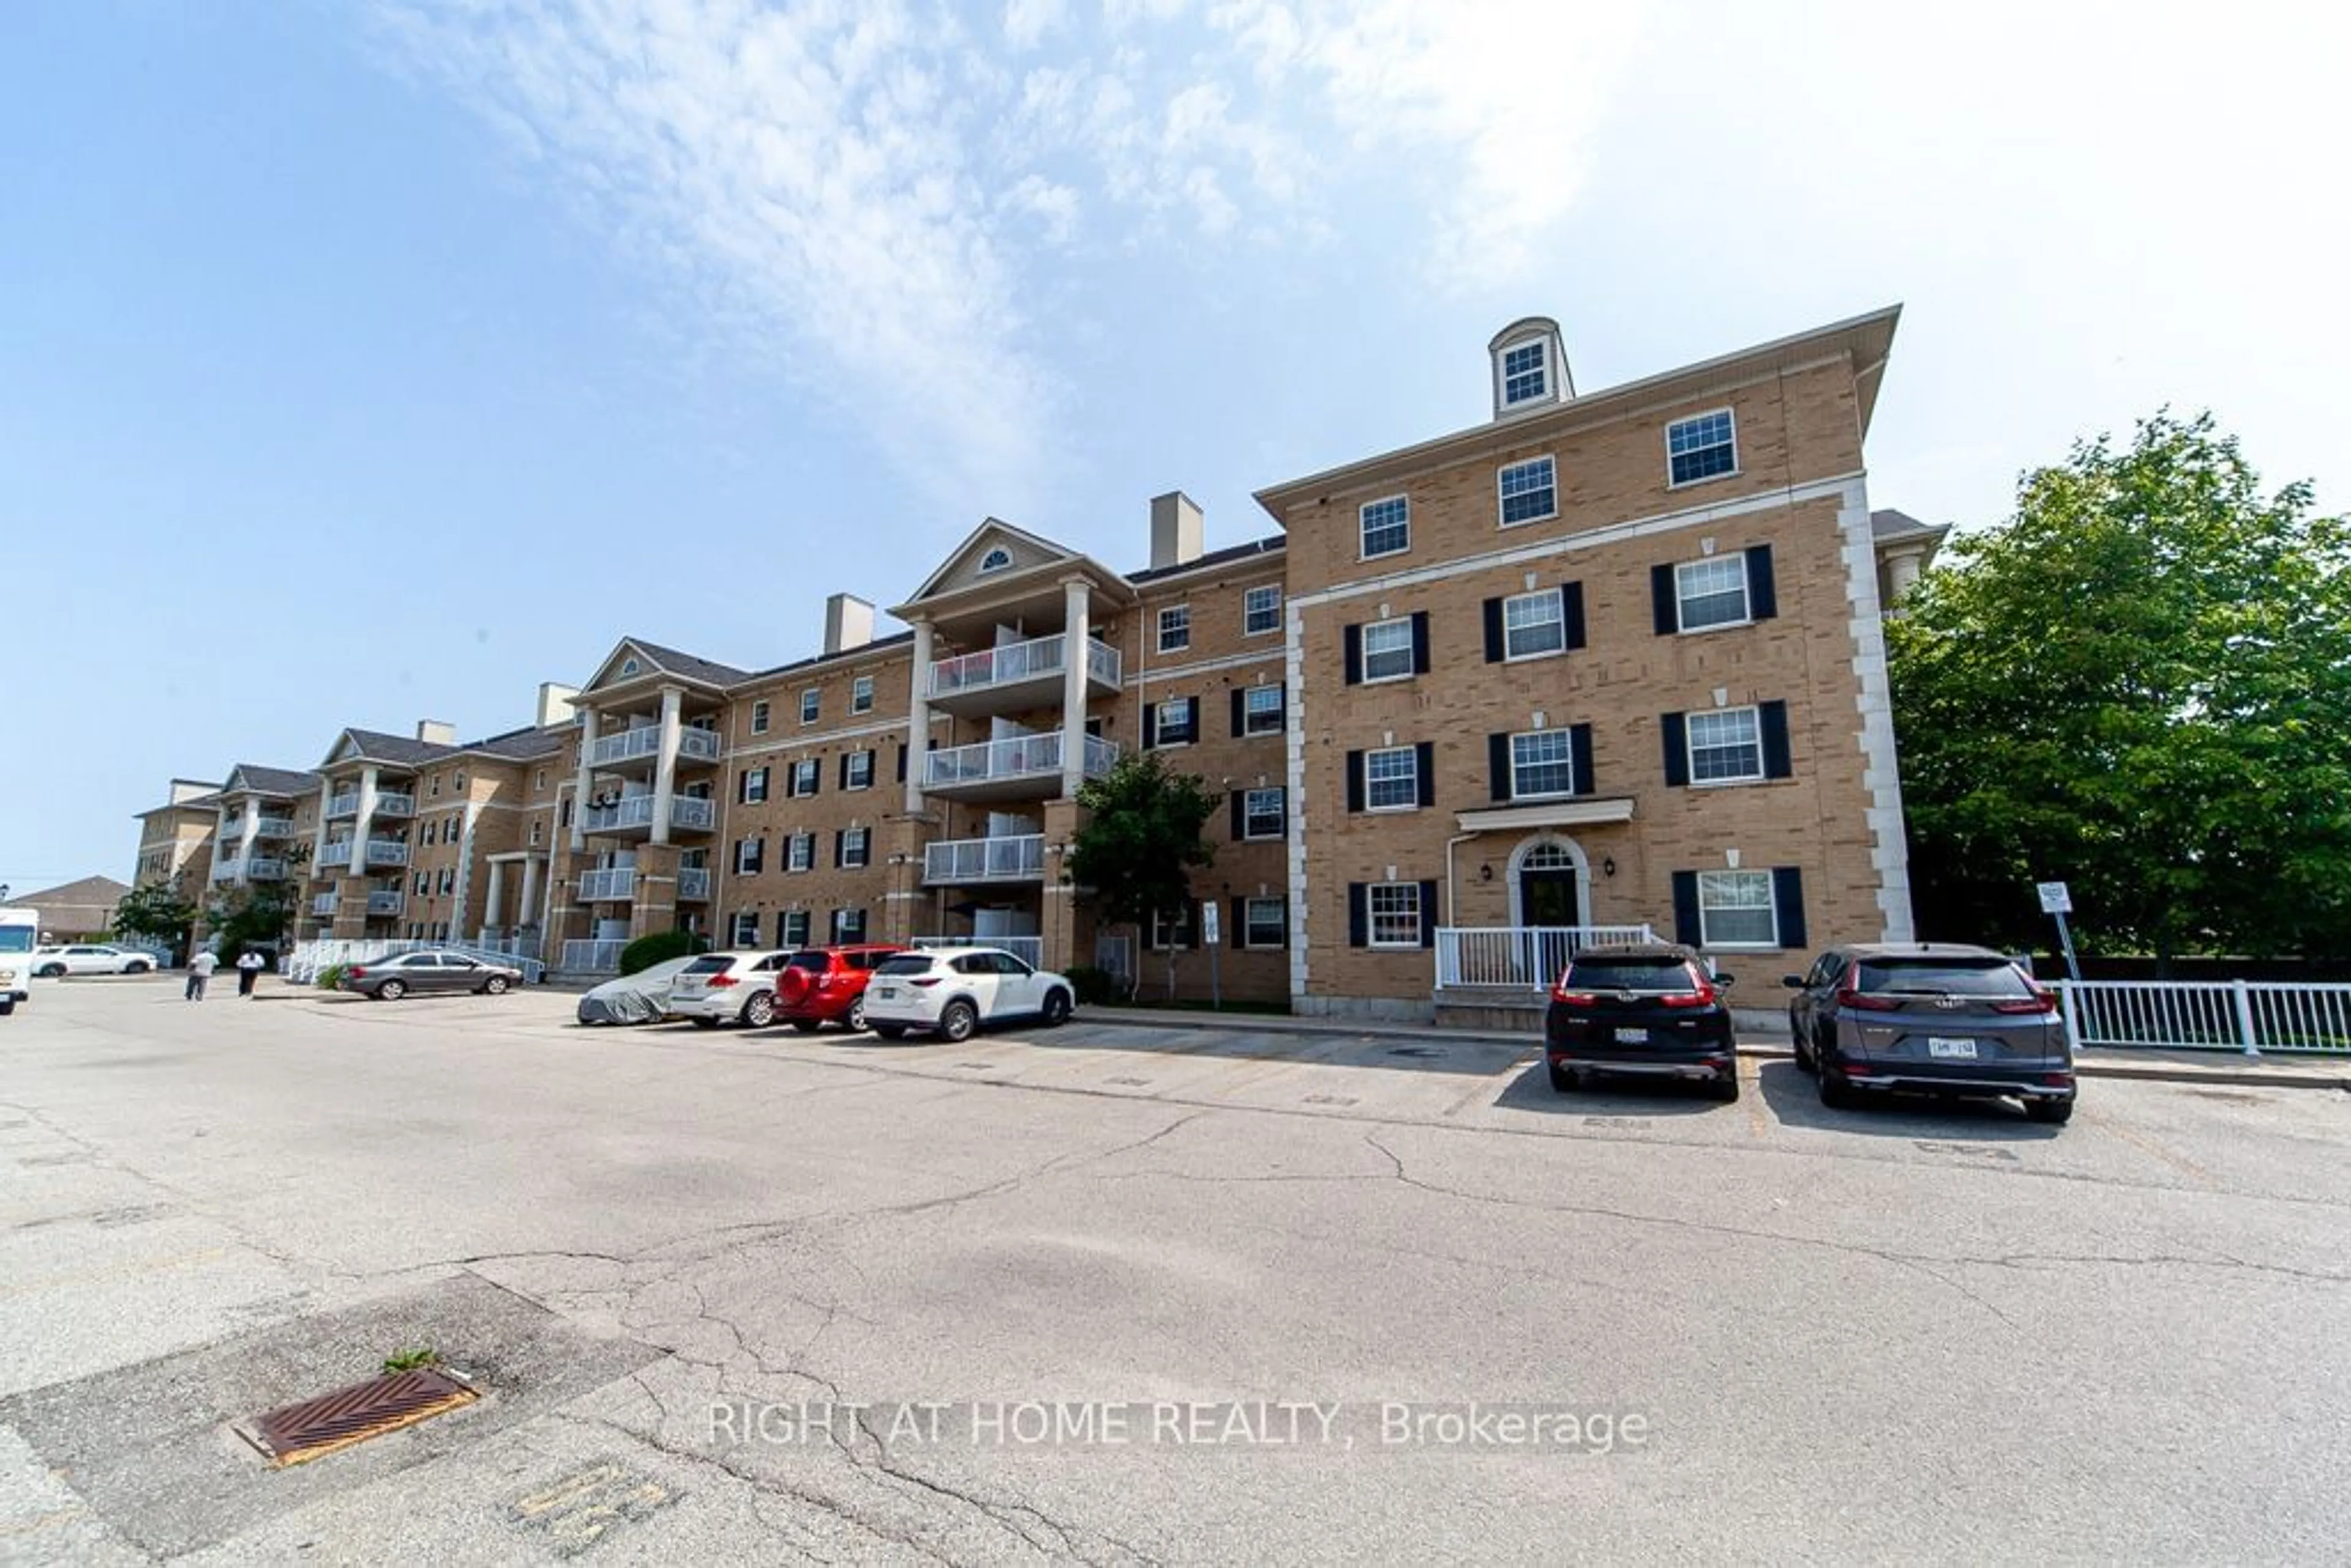 A pic from exterior of the house or condo for 7428 Markham Rd #301, Markham Ontario L3S 4V6